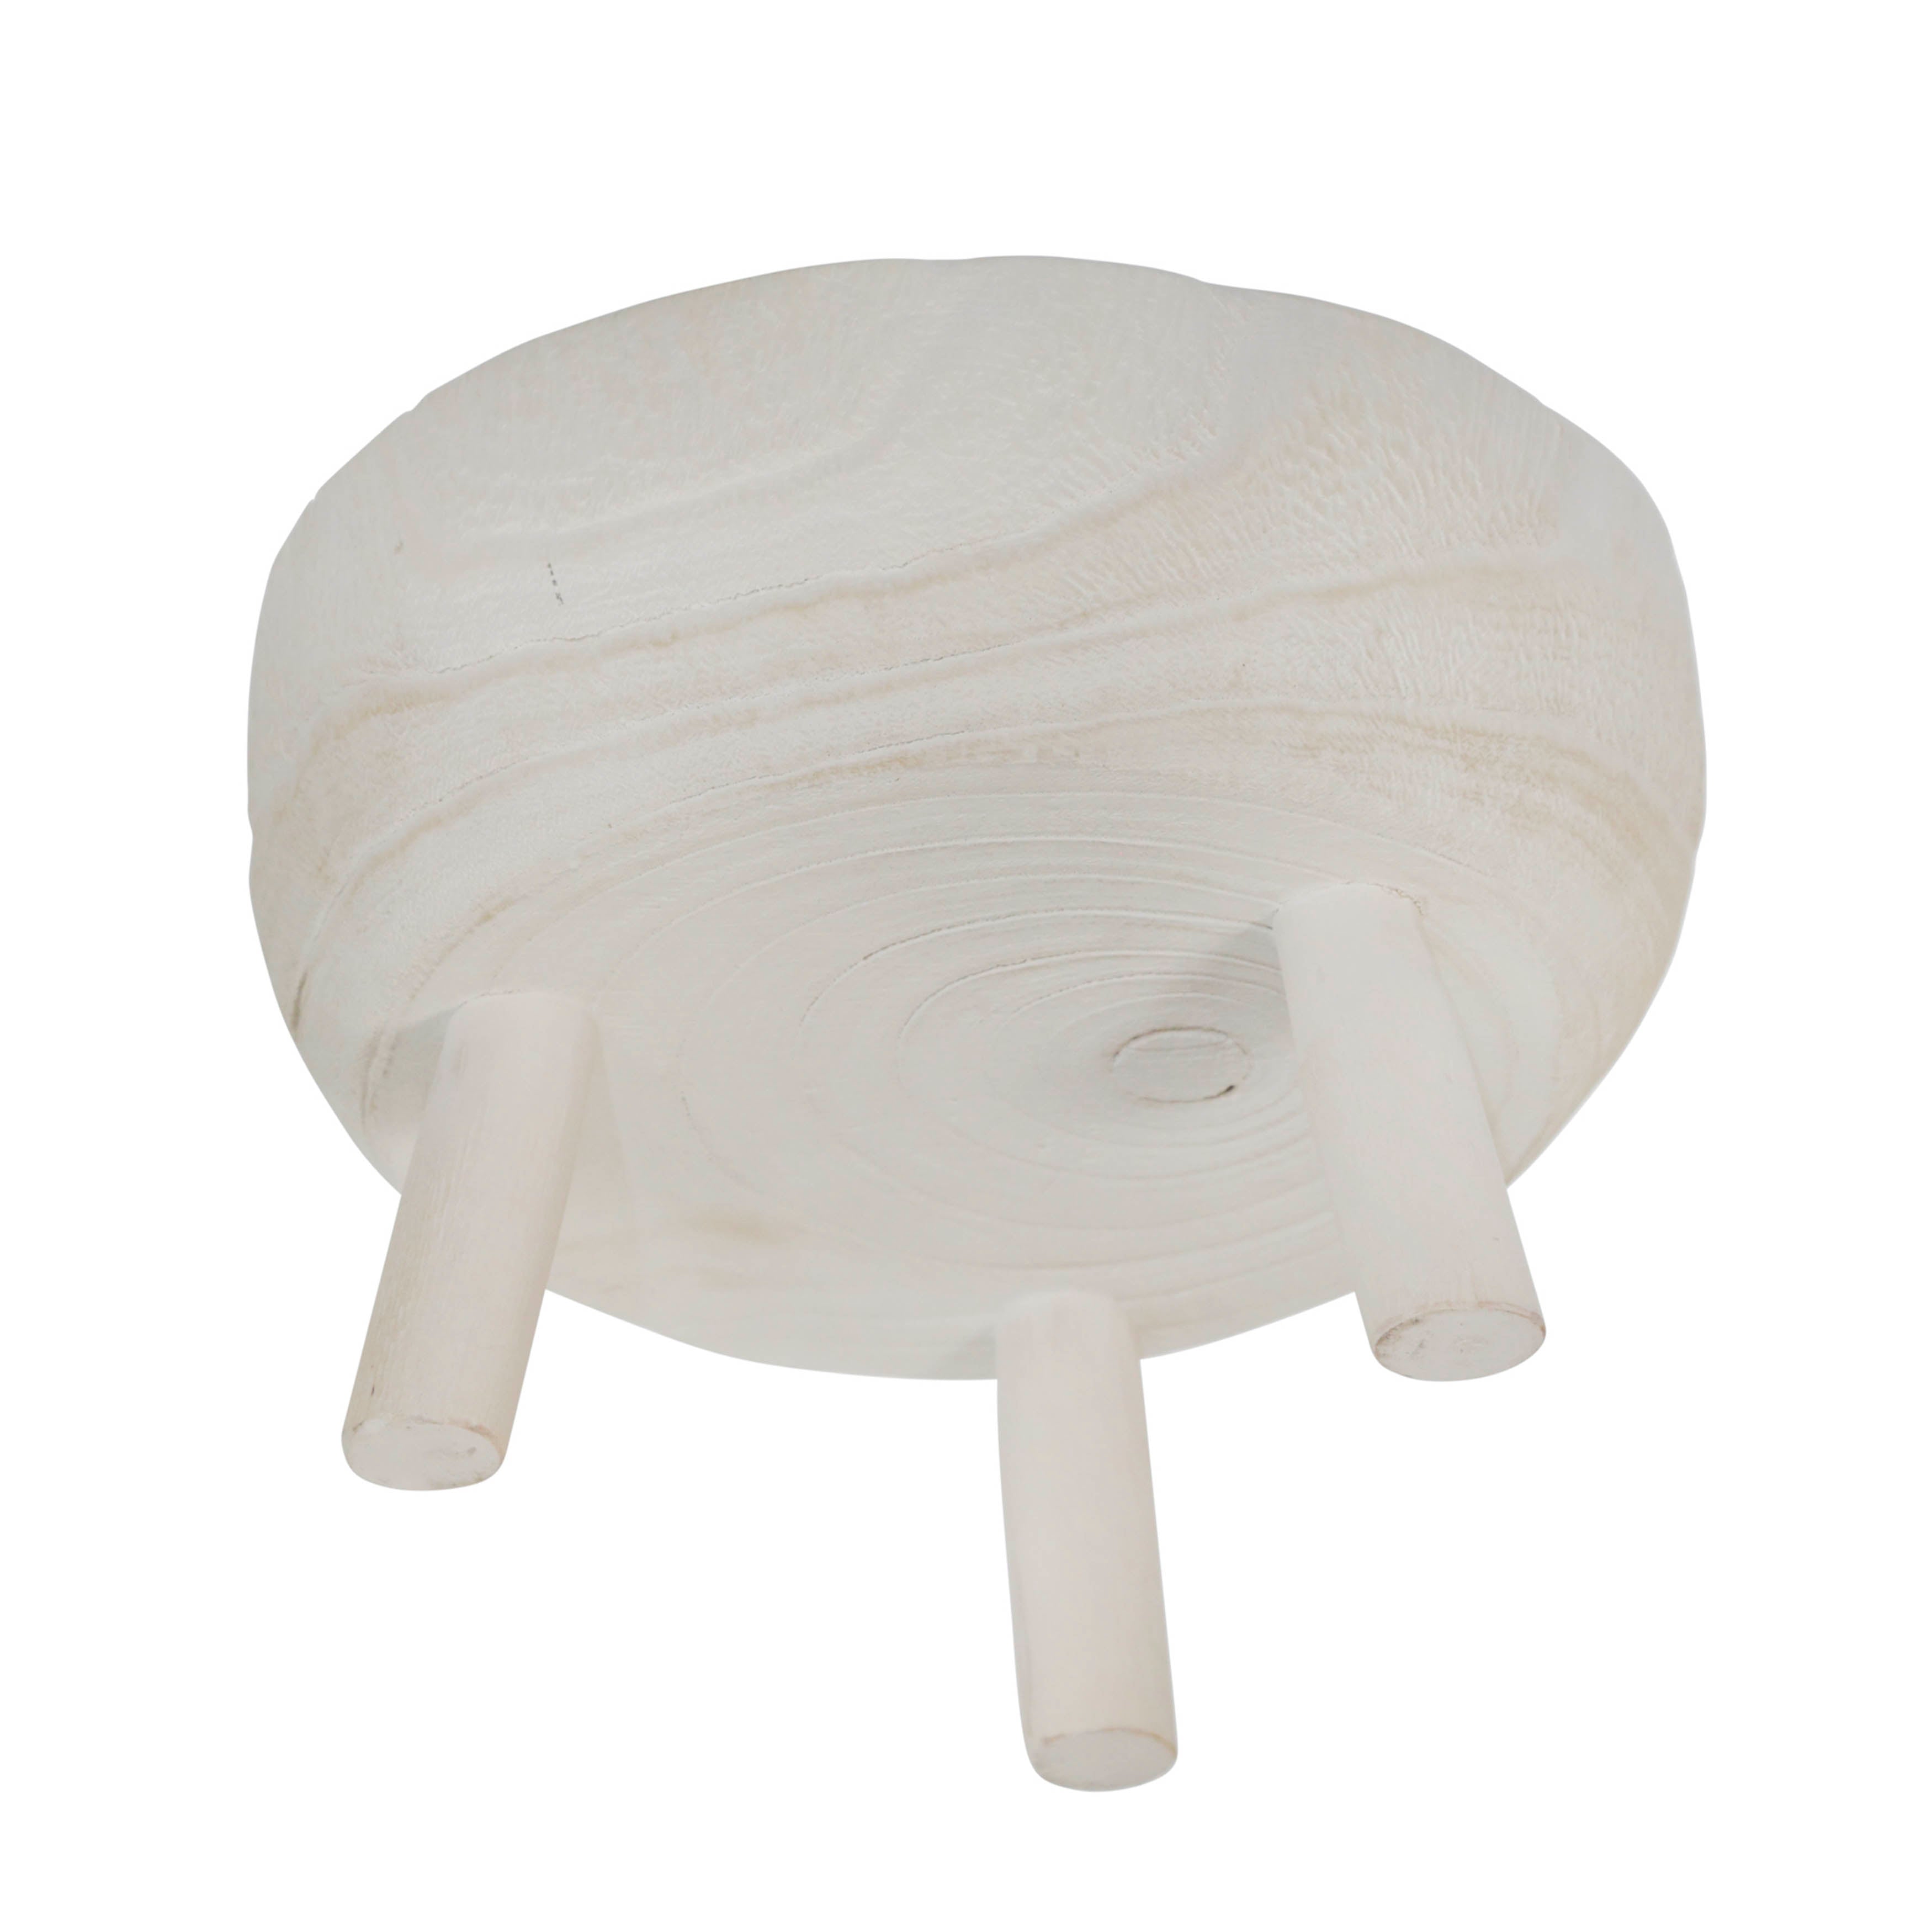 Wood Bowl With Legs - White